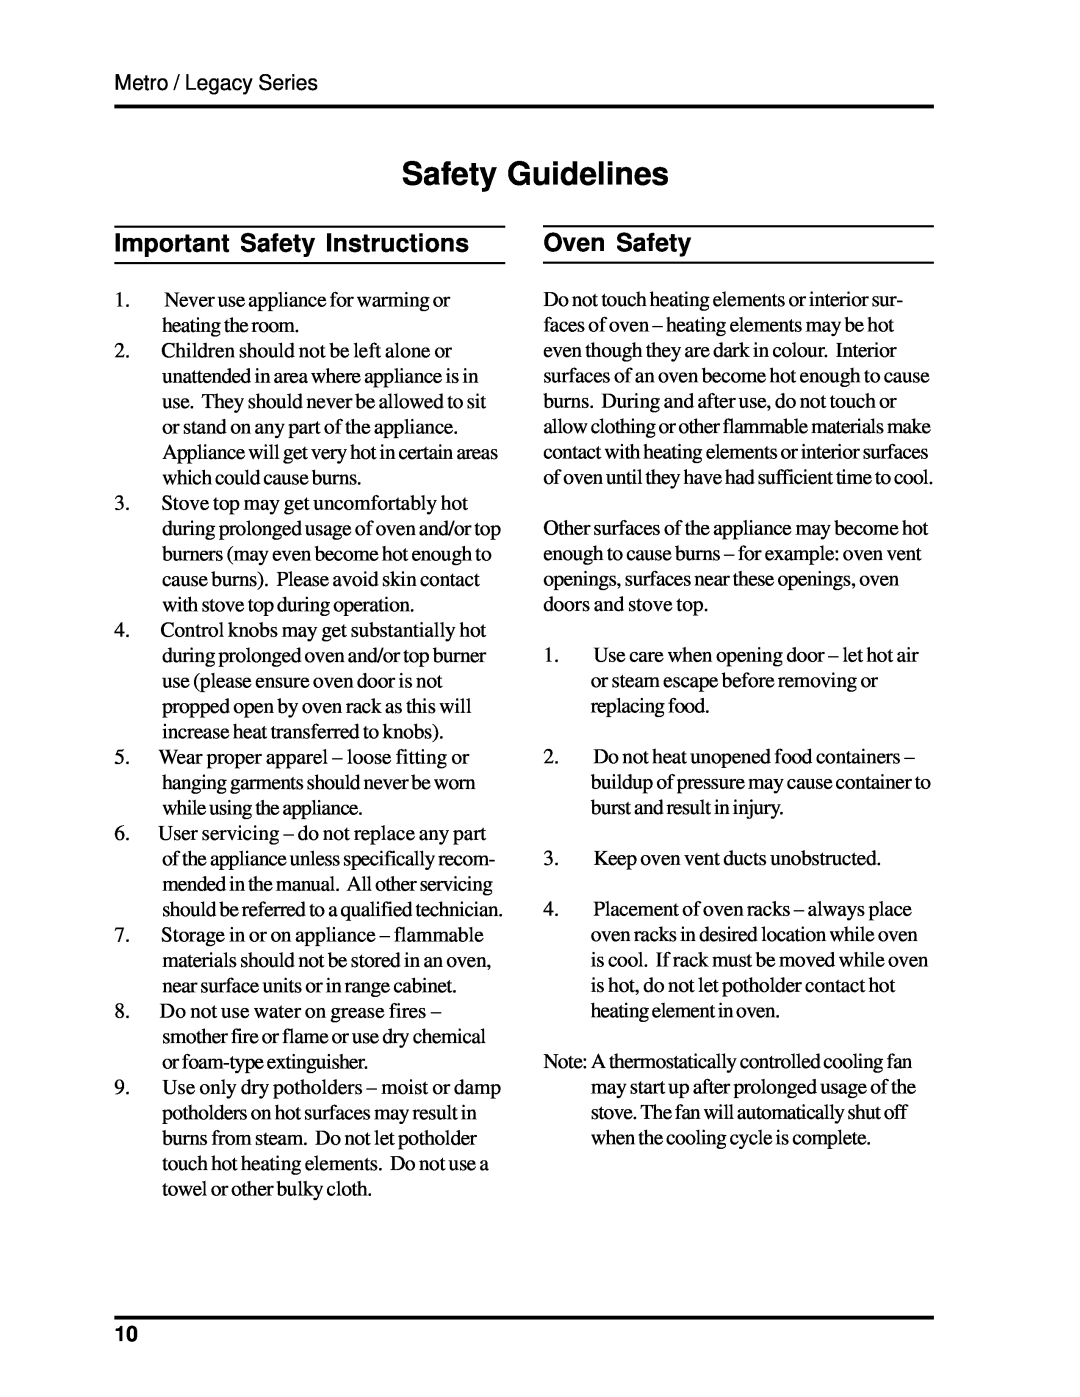 Heartland 3530, 3630 installation and operation guide Safety Guidelines, Important Safety Instructions, Oven Safety 